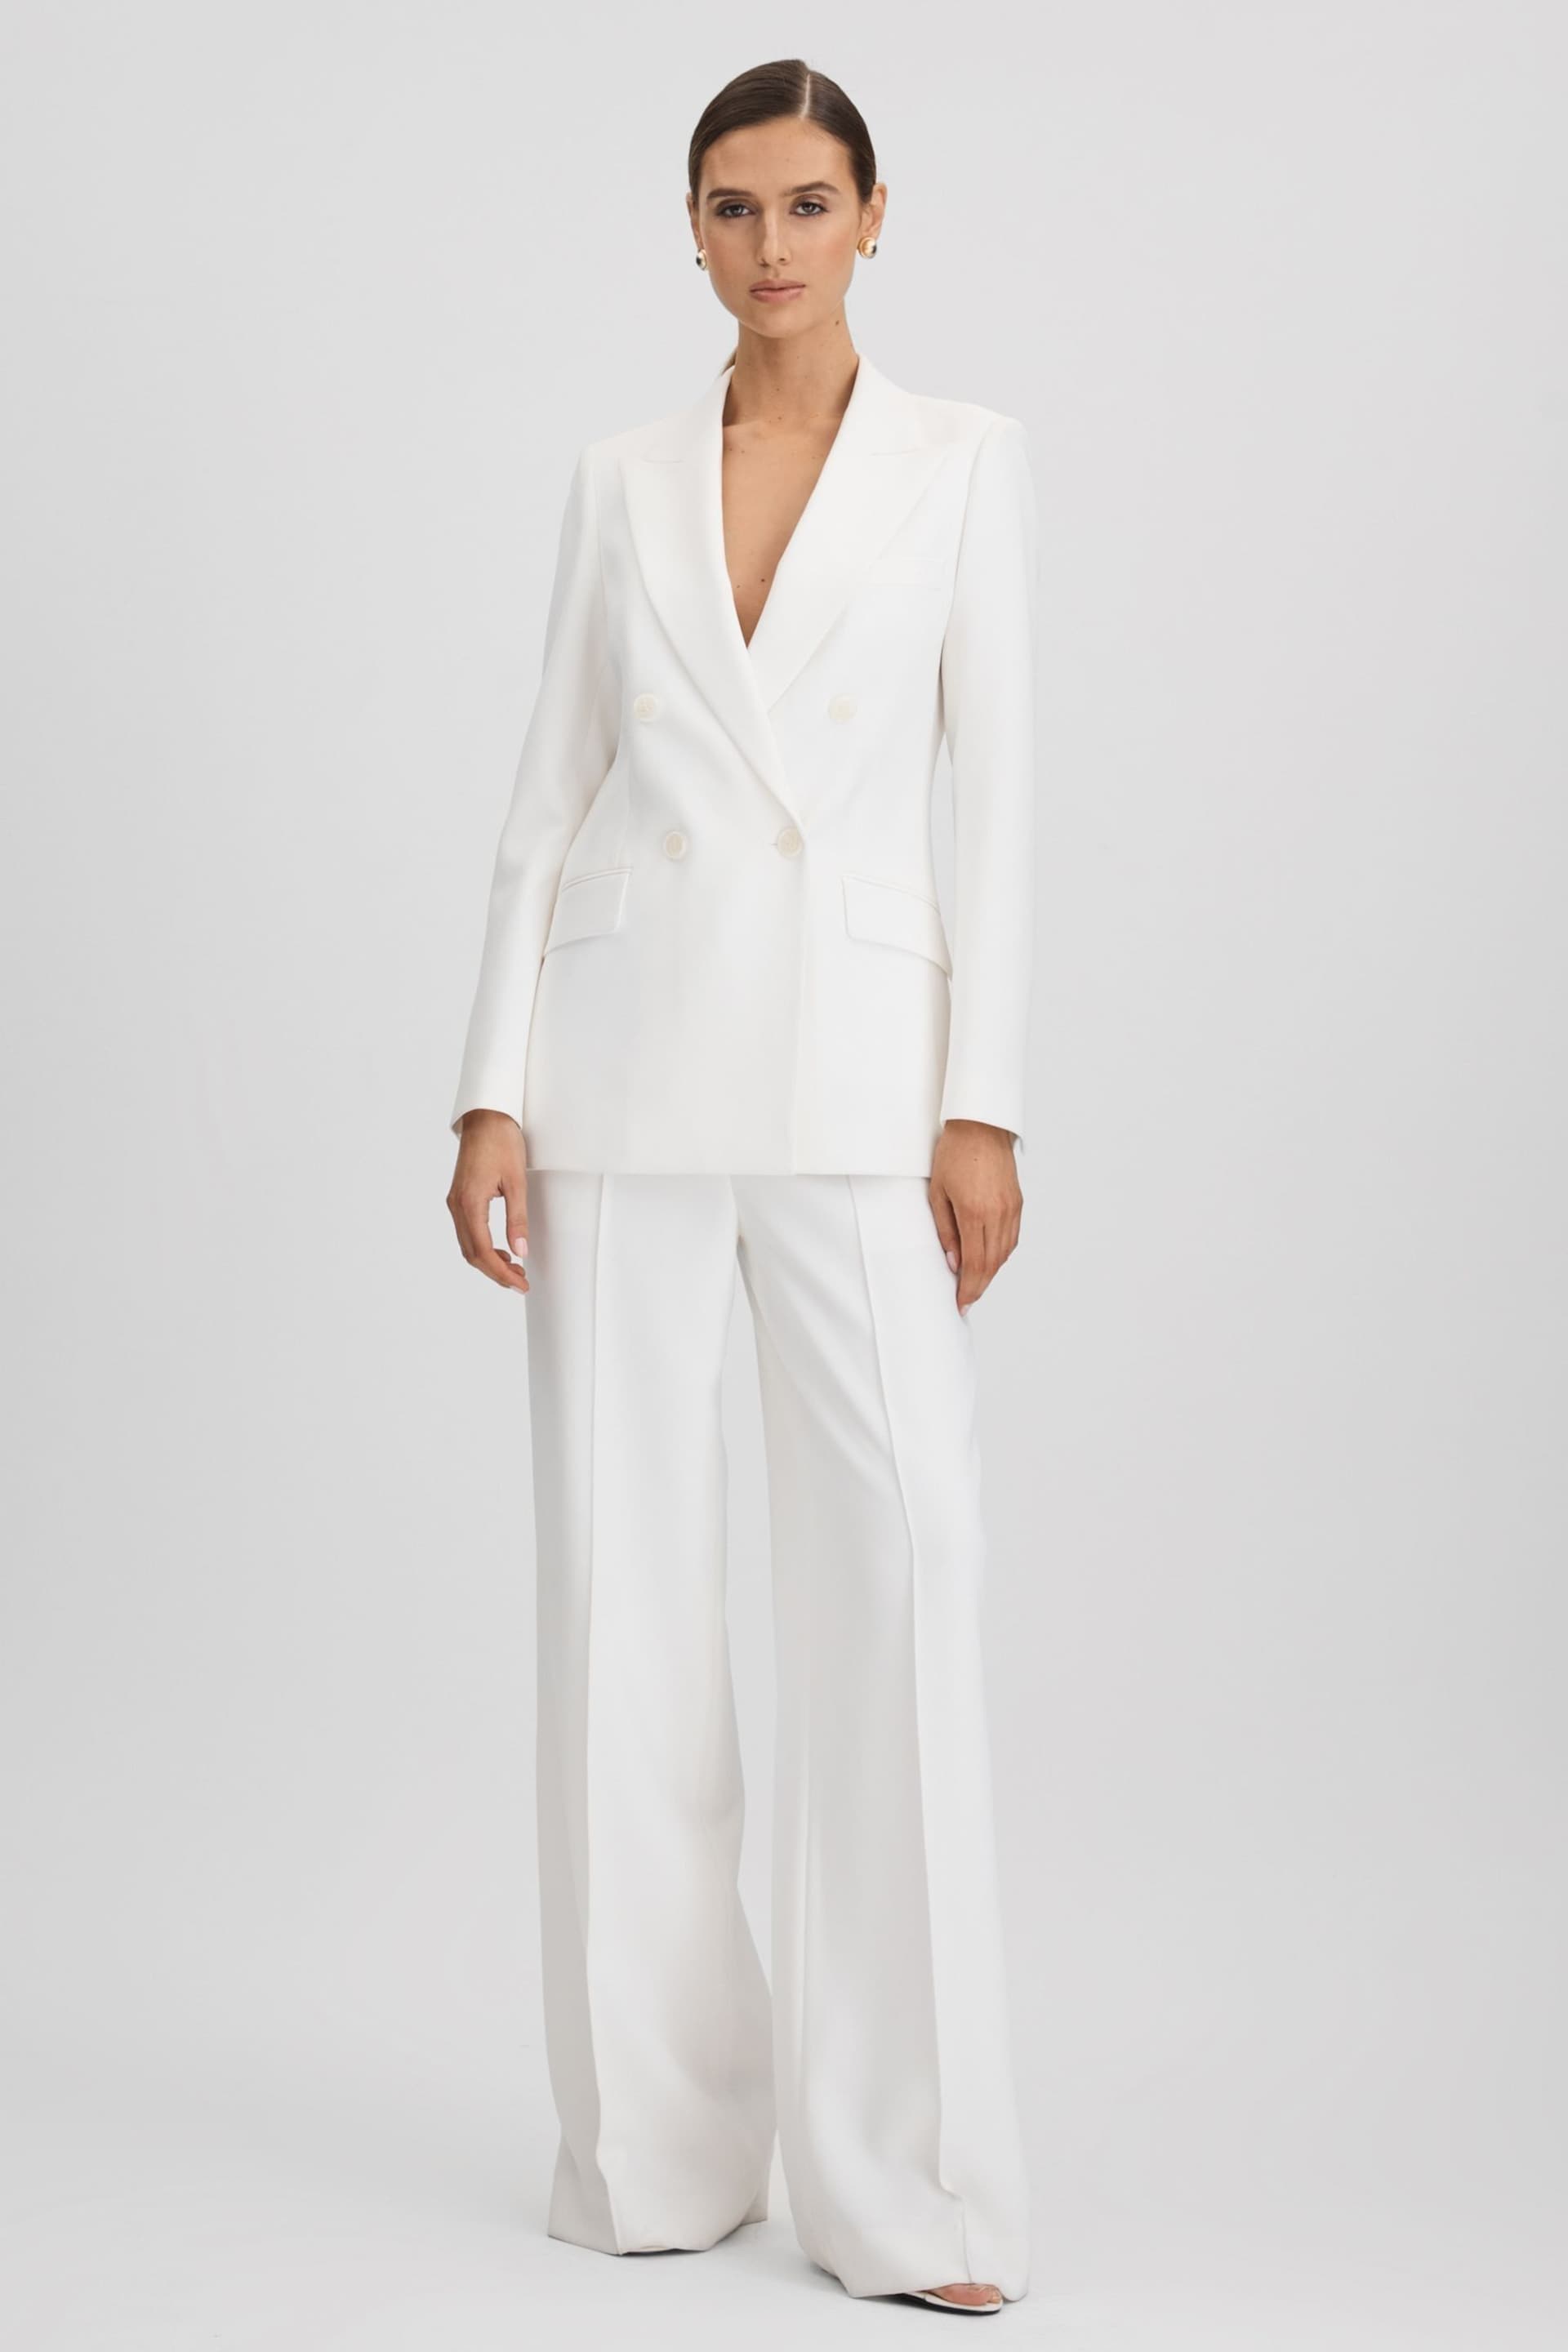 Reiss White Sienna Double Breasted Crepe Suit Blazer - Image 5 of 7